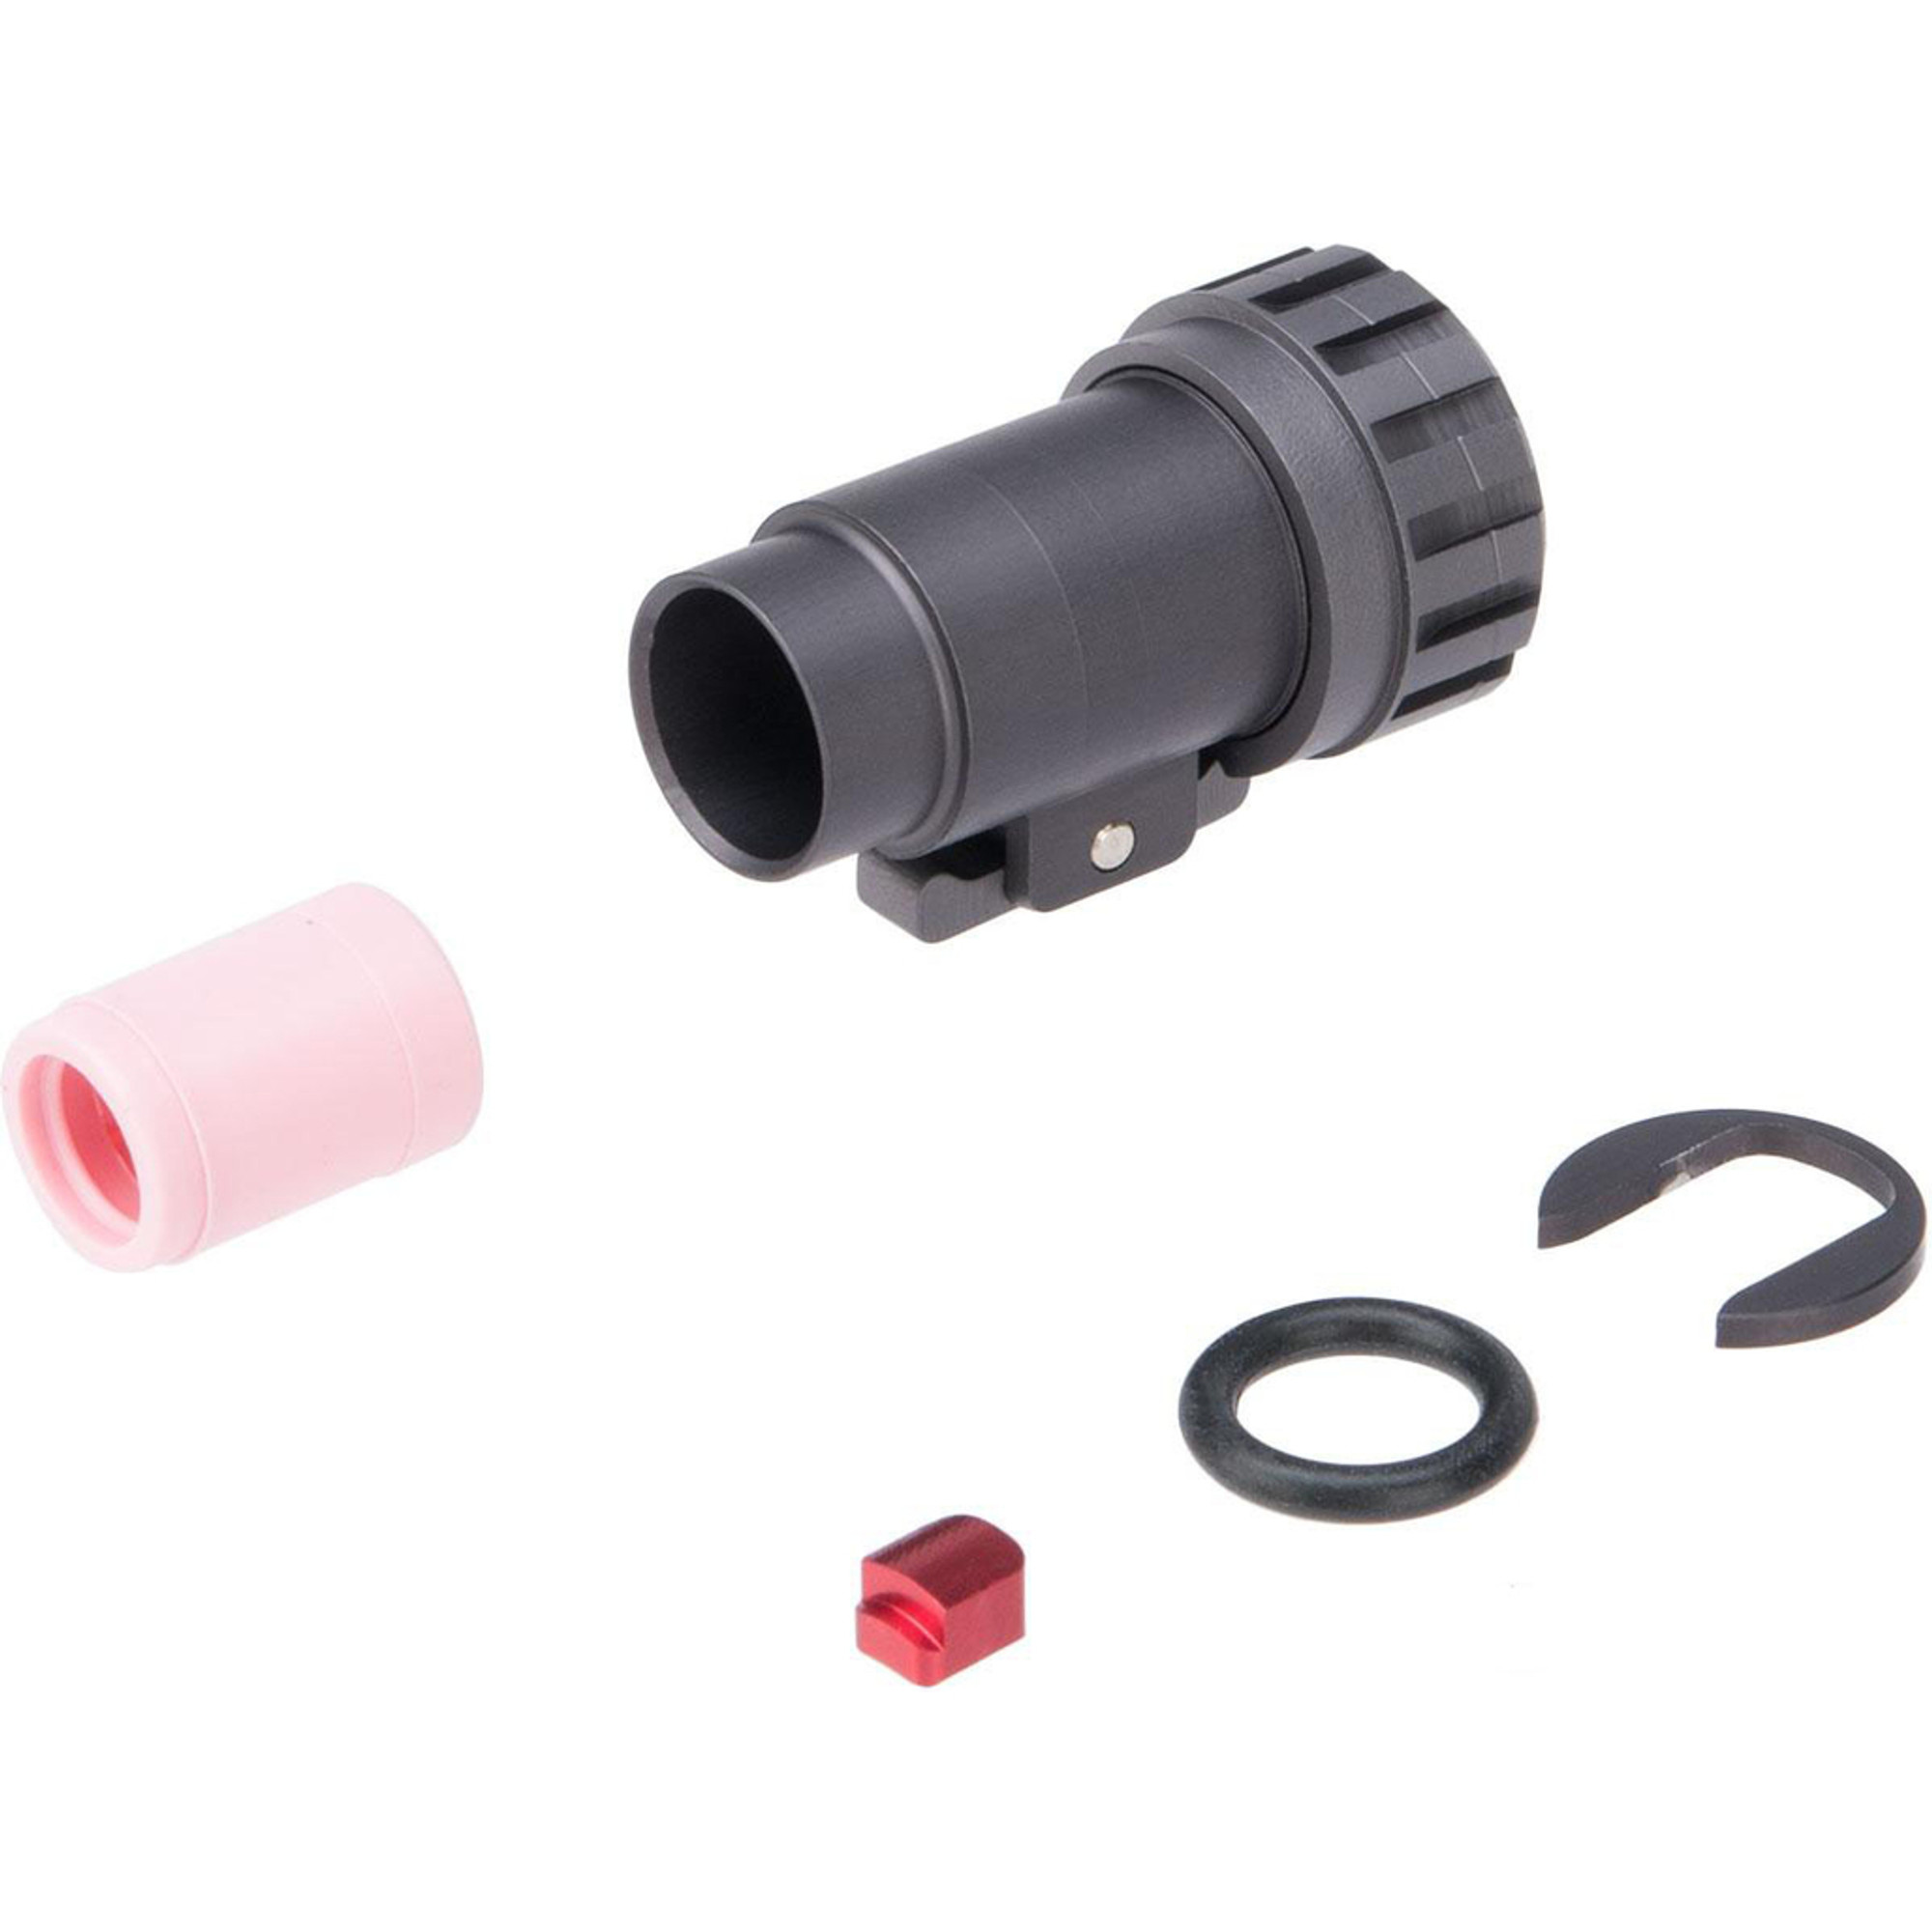 Maple Leaf Hopup Chamber for GHK G5 Airsoft GBB Rifles